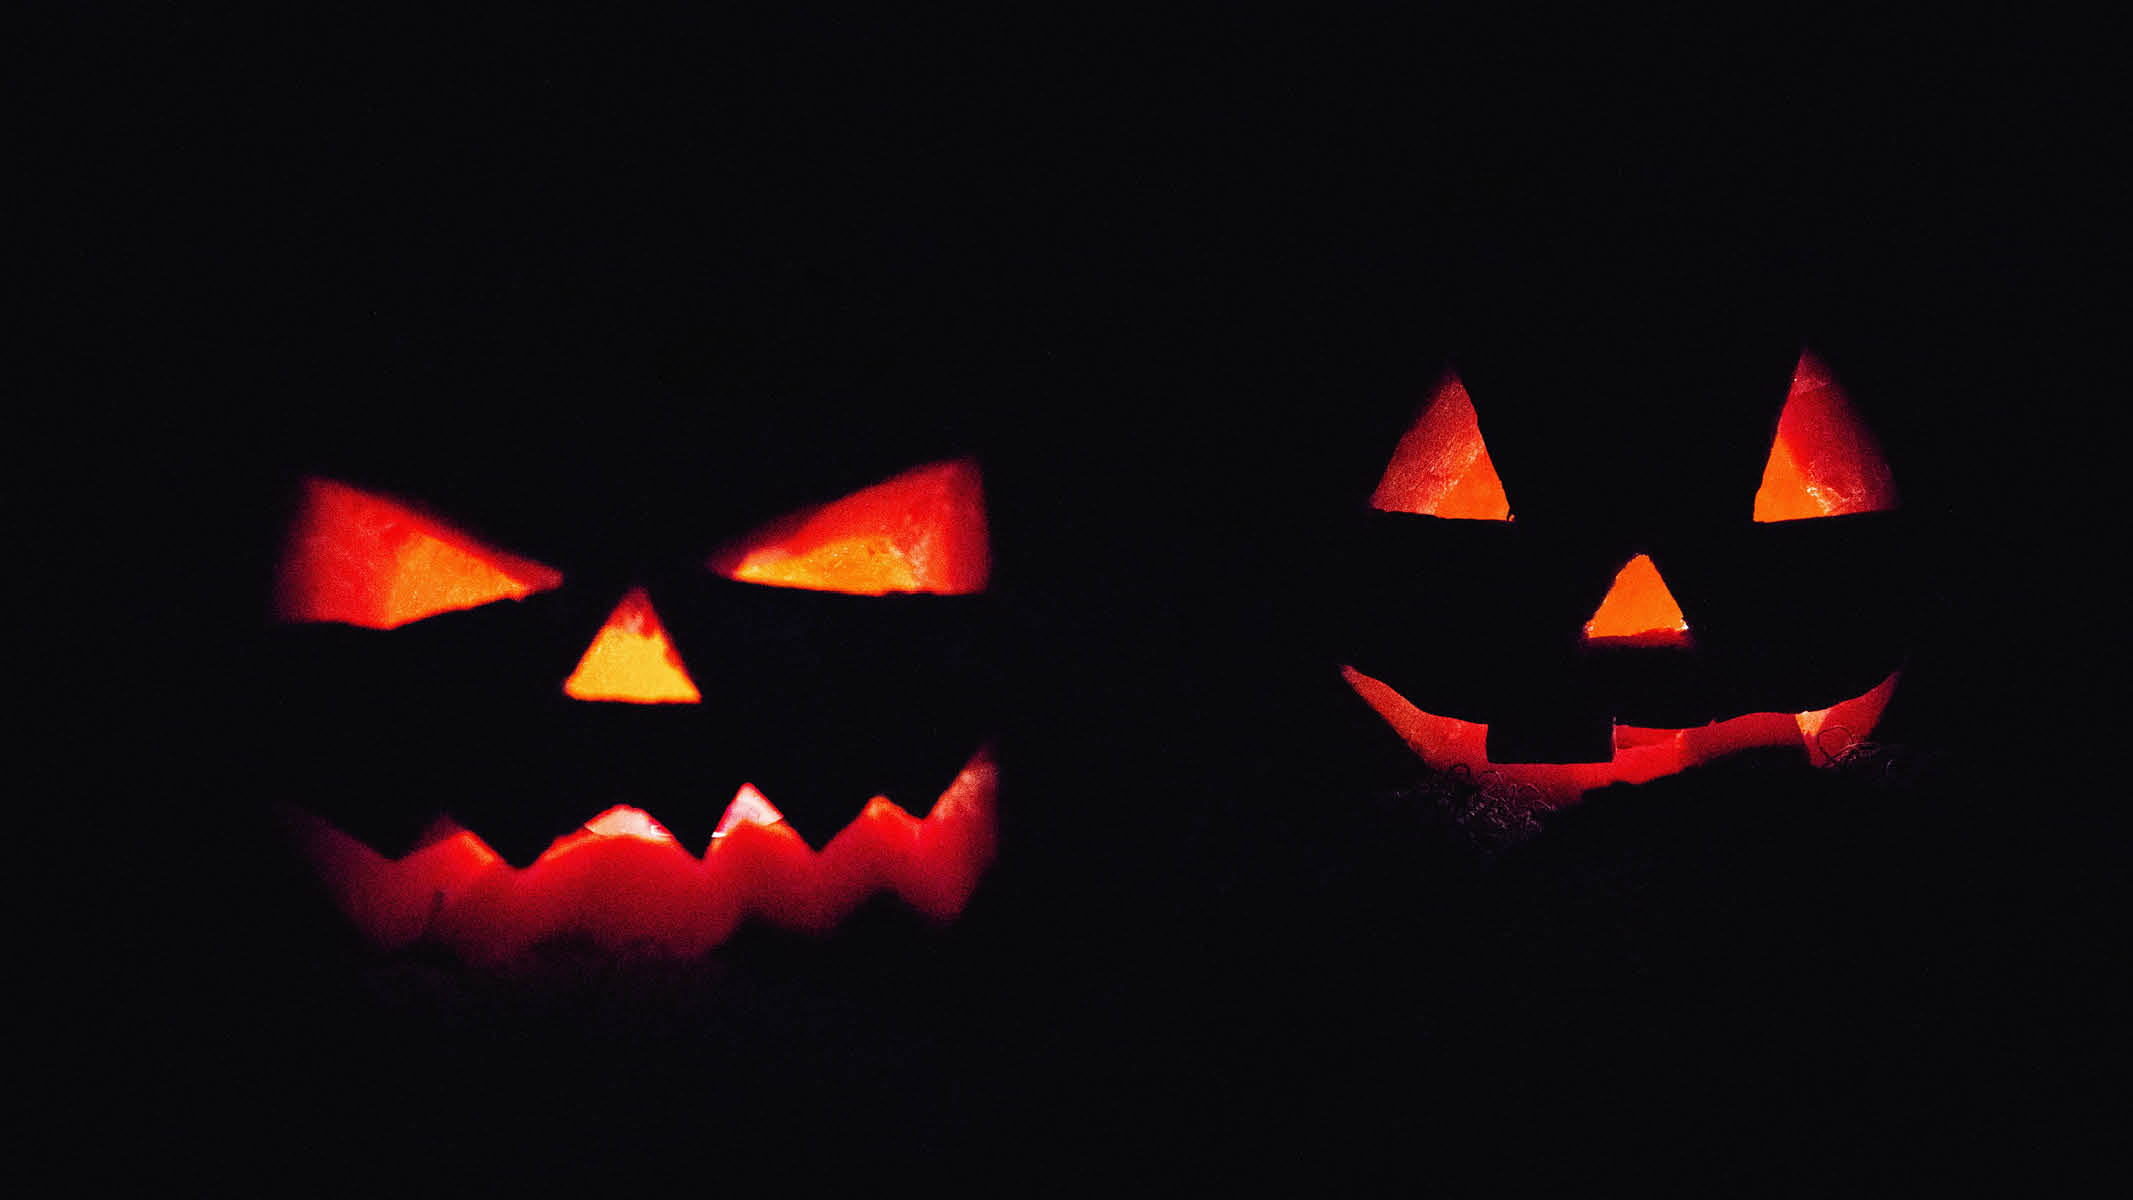 Two pumpkins with scary faces carved in for Halloween.